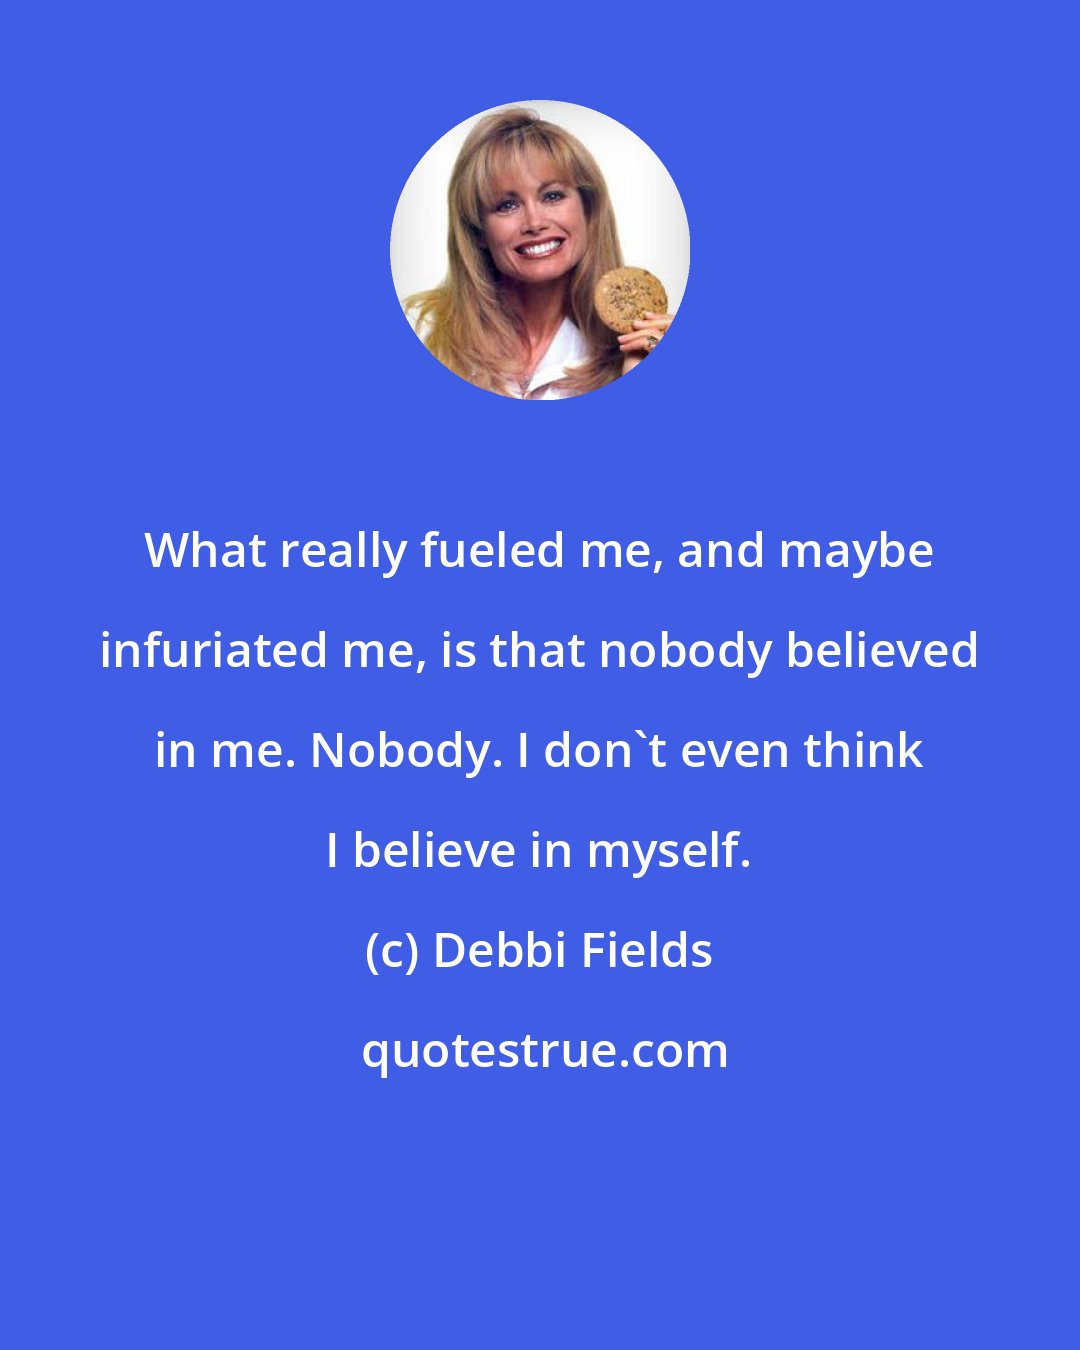 Debbi Fields: What really fueled me, and maybe infuriated me, is that nobody believed in me. Nobody. I don't even think I believe in myself.